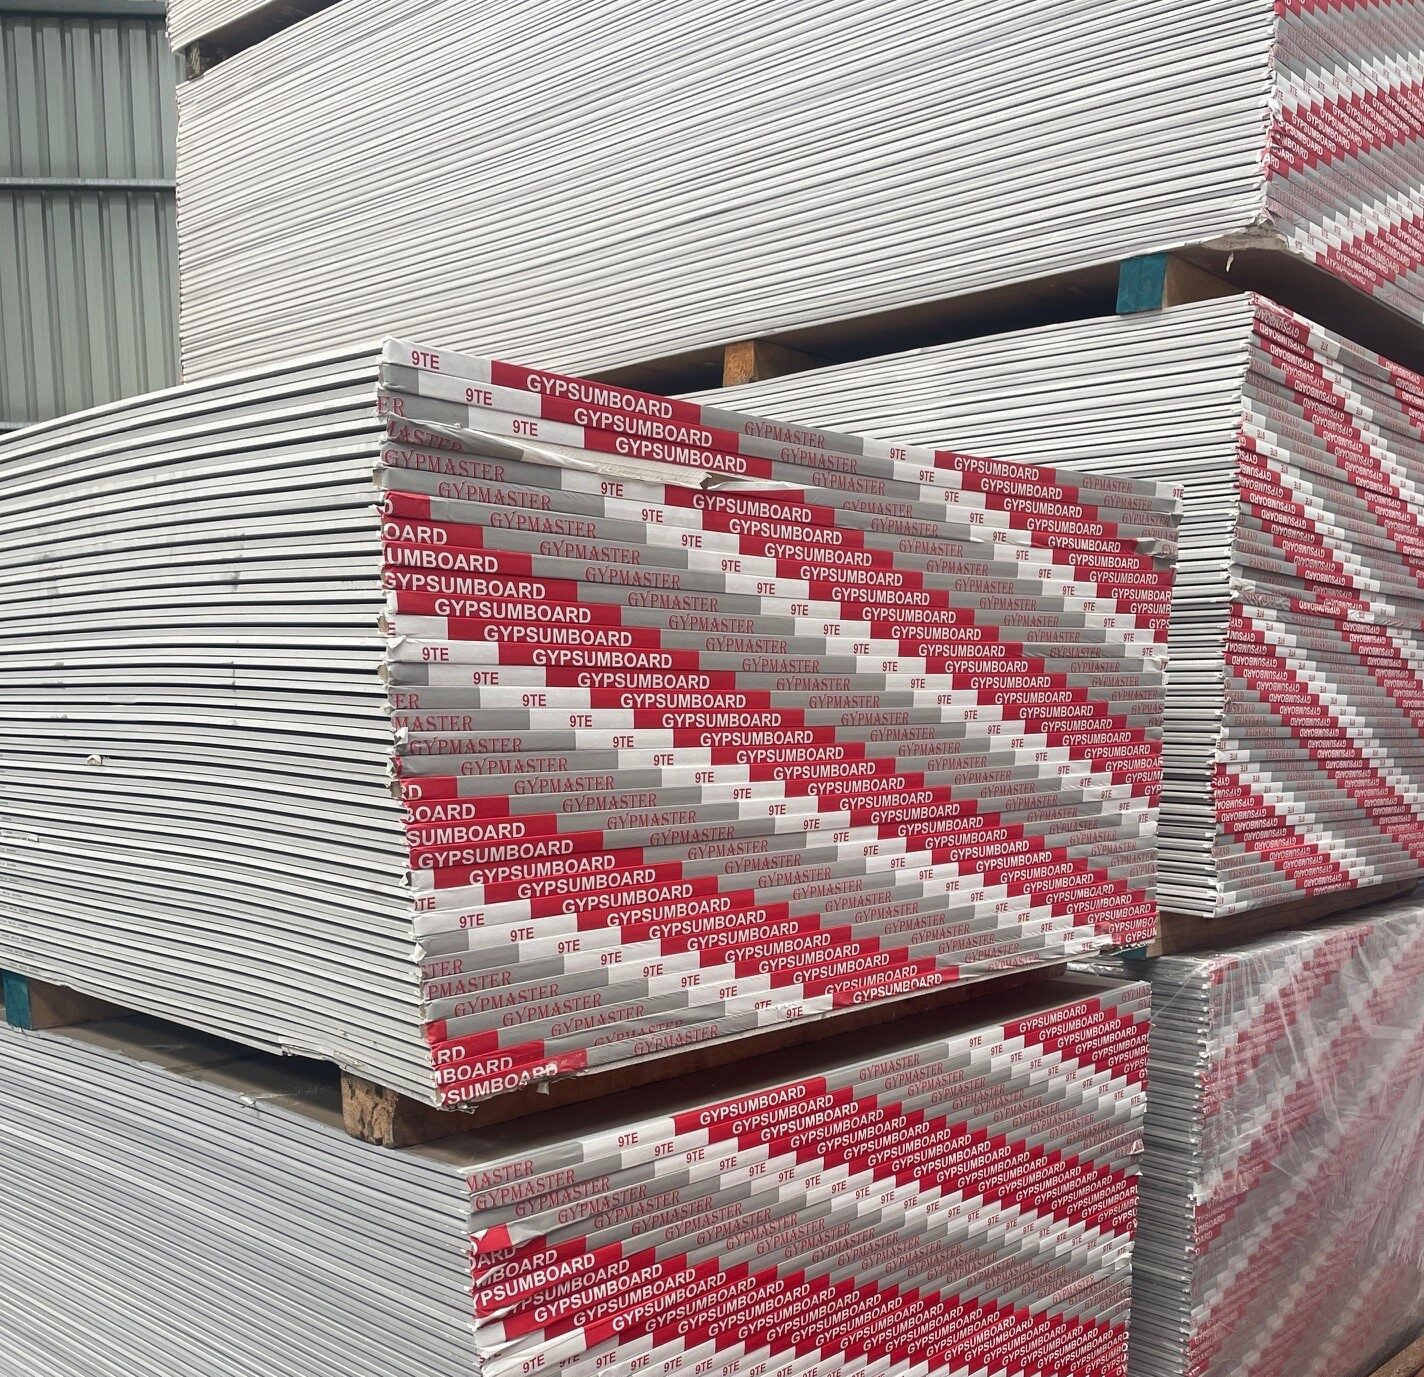 Stacks of 9mm gypsum boards with taper edges, wrapped in red and white branded packaging, stored in an outdoor warehouse setting.